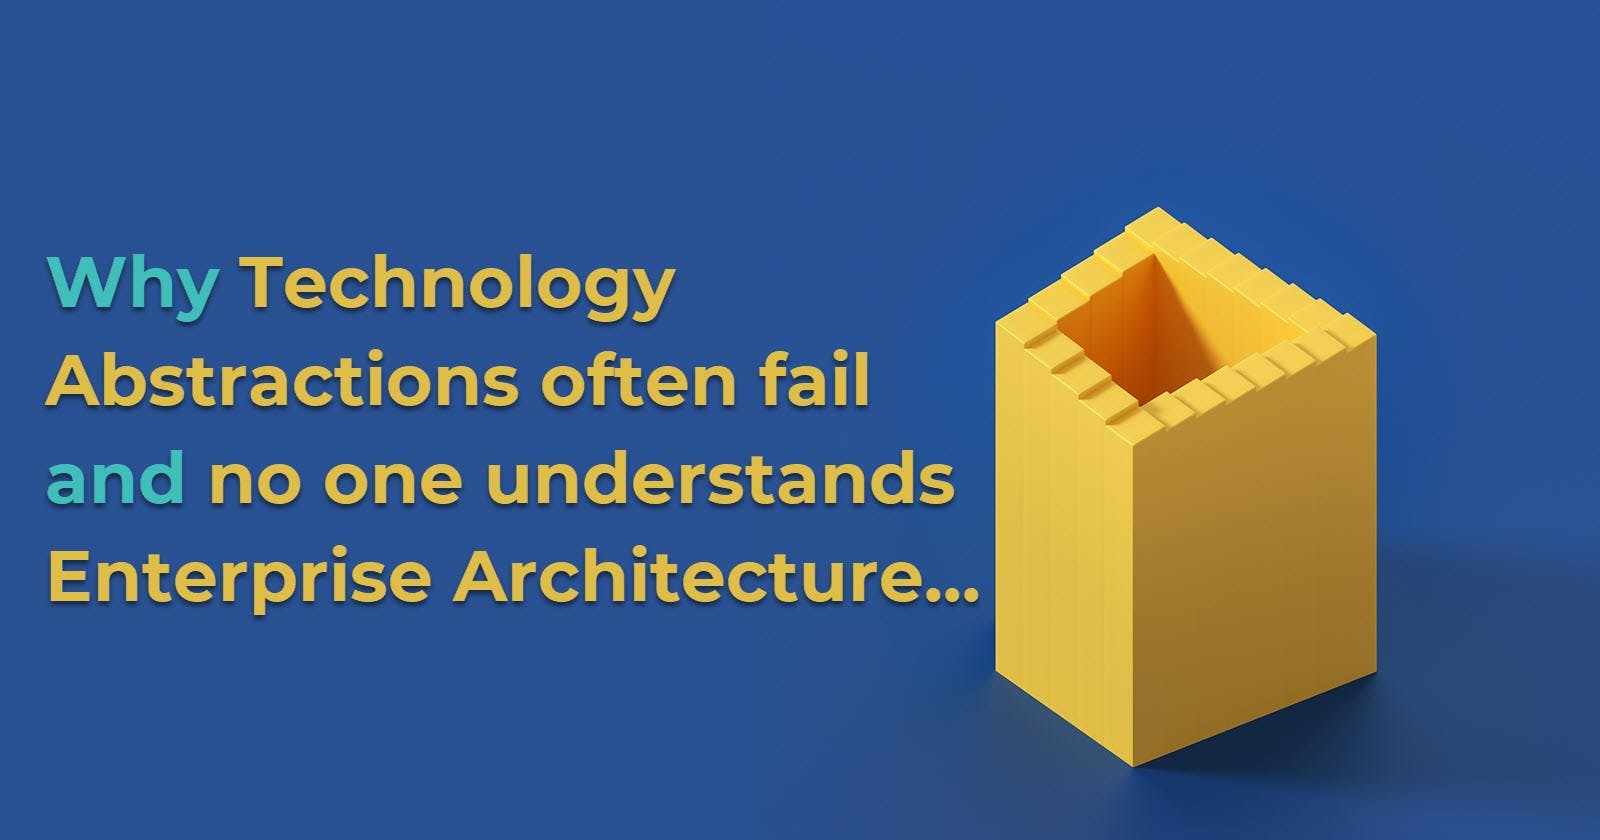 Why Technology Abstractions often fail...